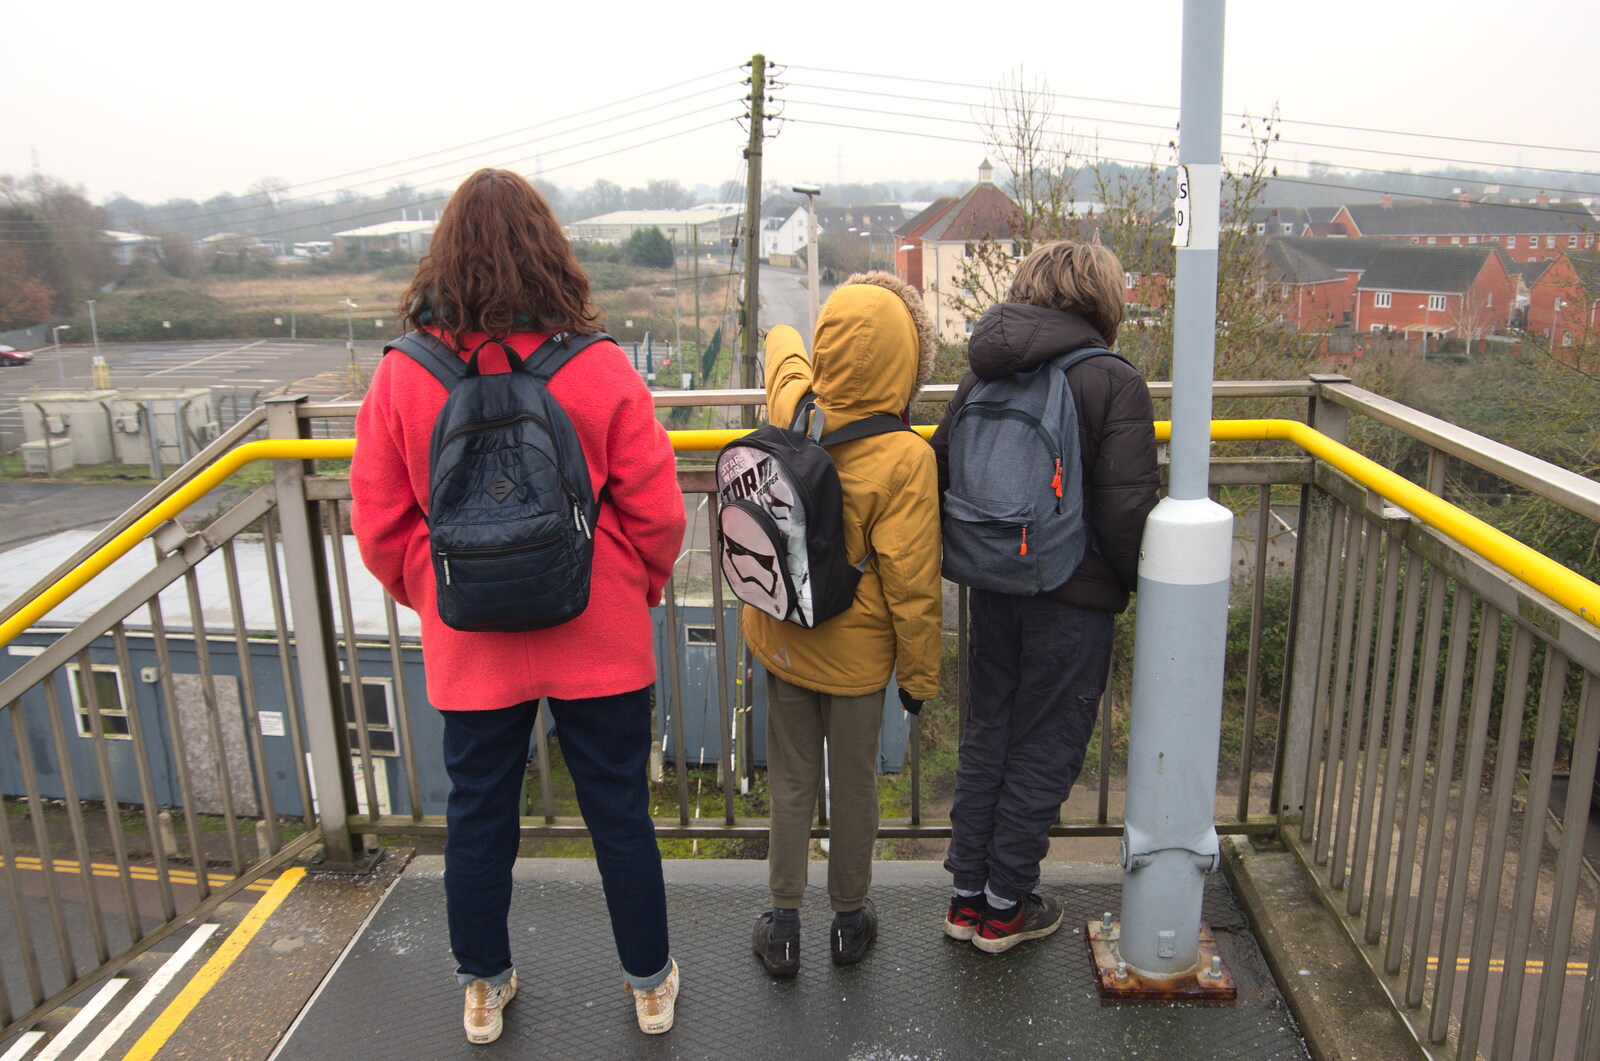 We stand on the bridge and look out from A Trip to the Natural History Museum, Kensington, London - 15th January 2022